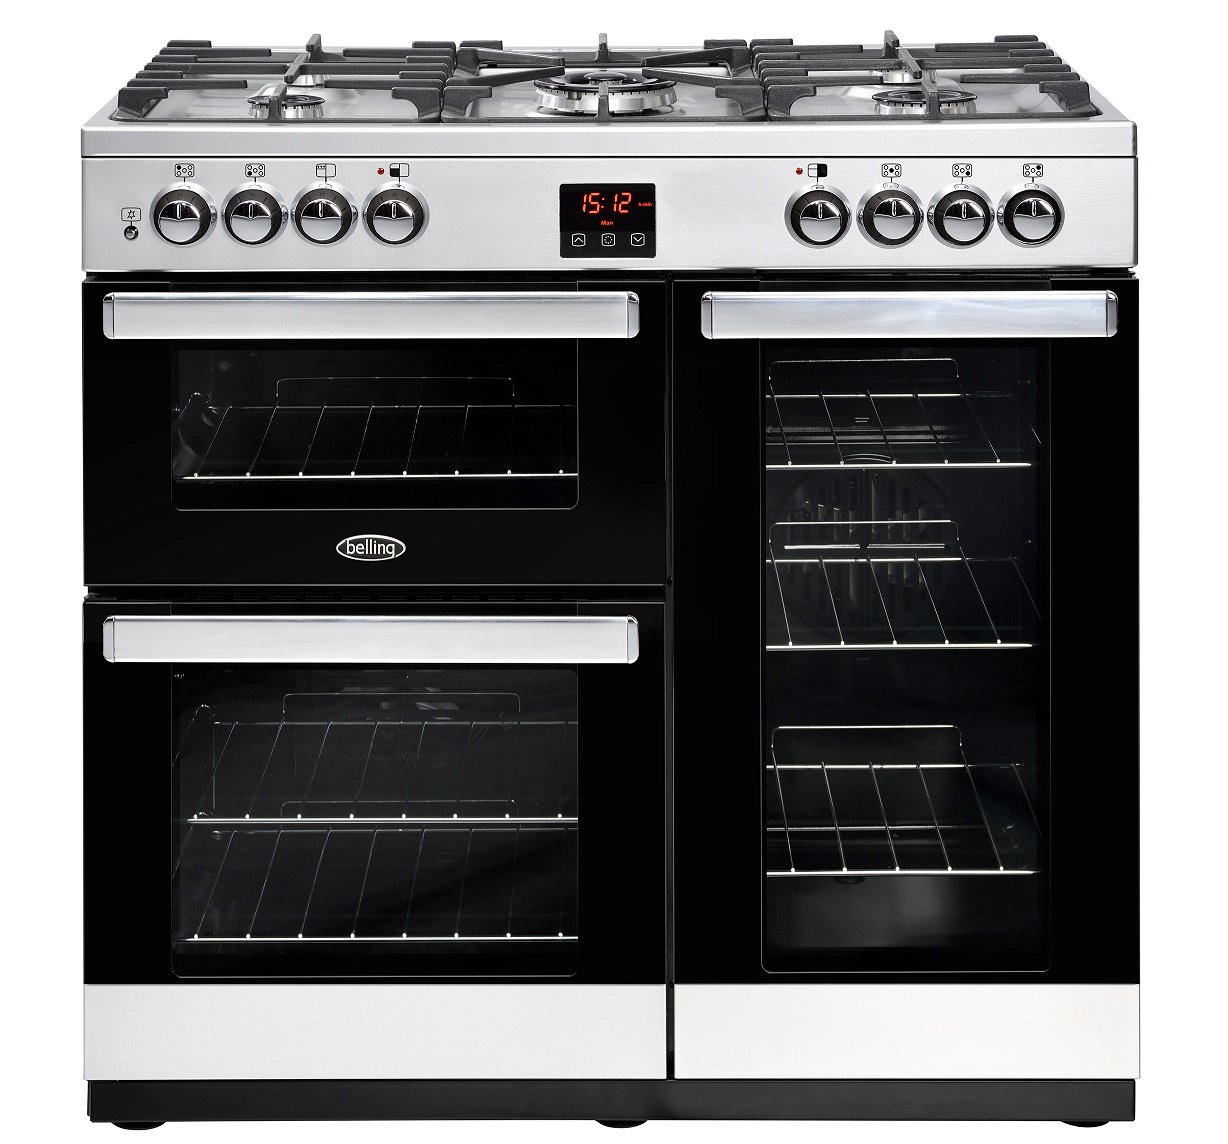 90cm dual fuel range cooker with 4kW PowerWok, Maxi-Clock, market leading tall oven and easy clean enamel.